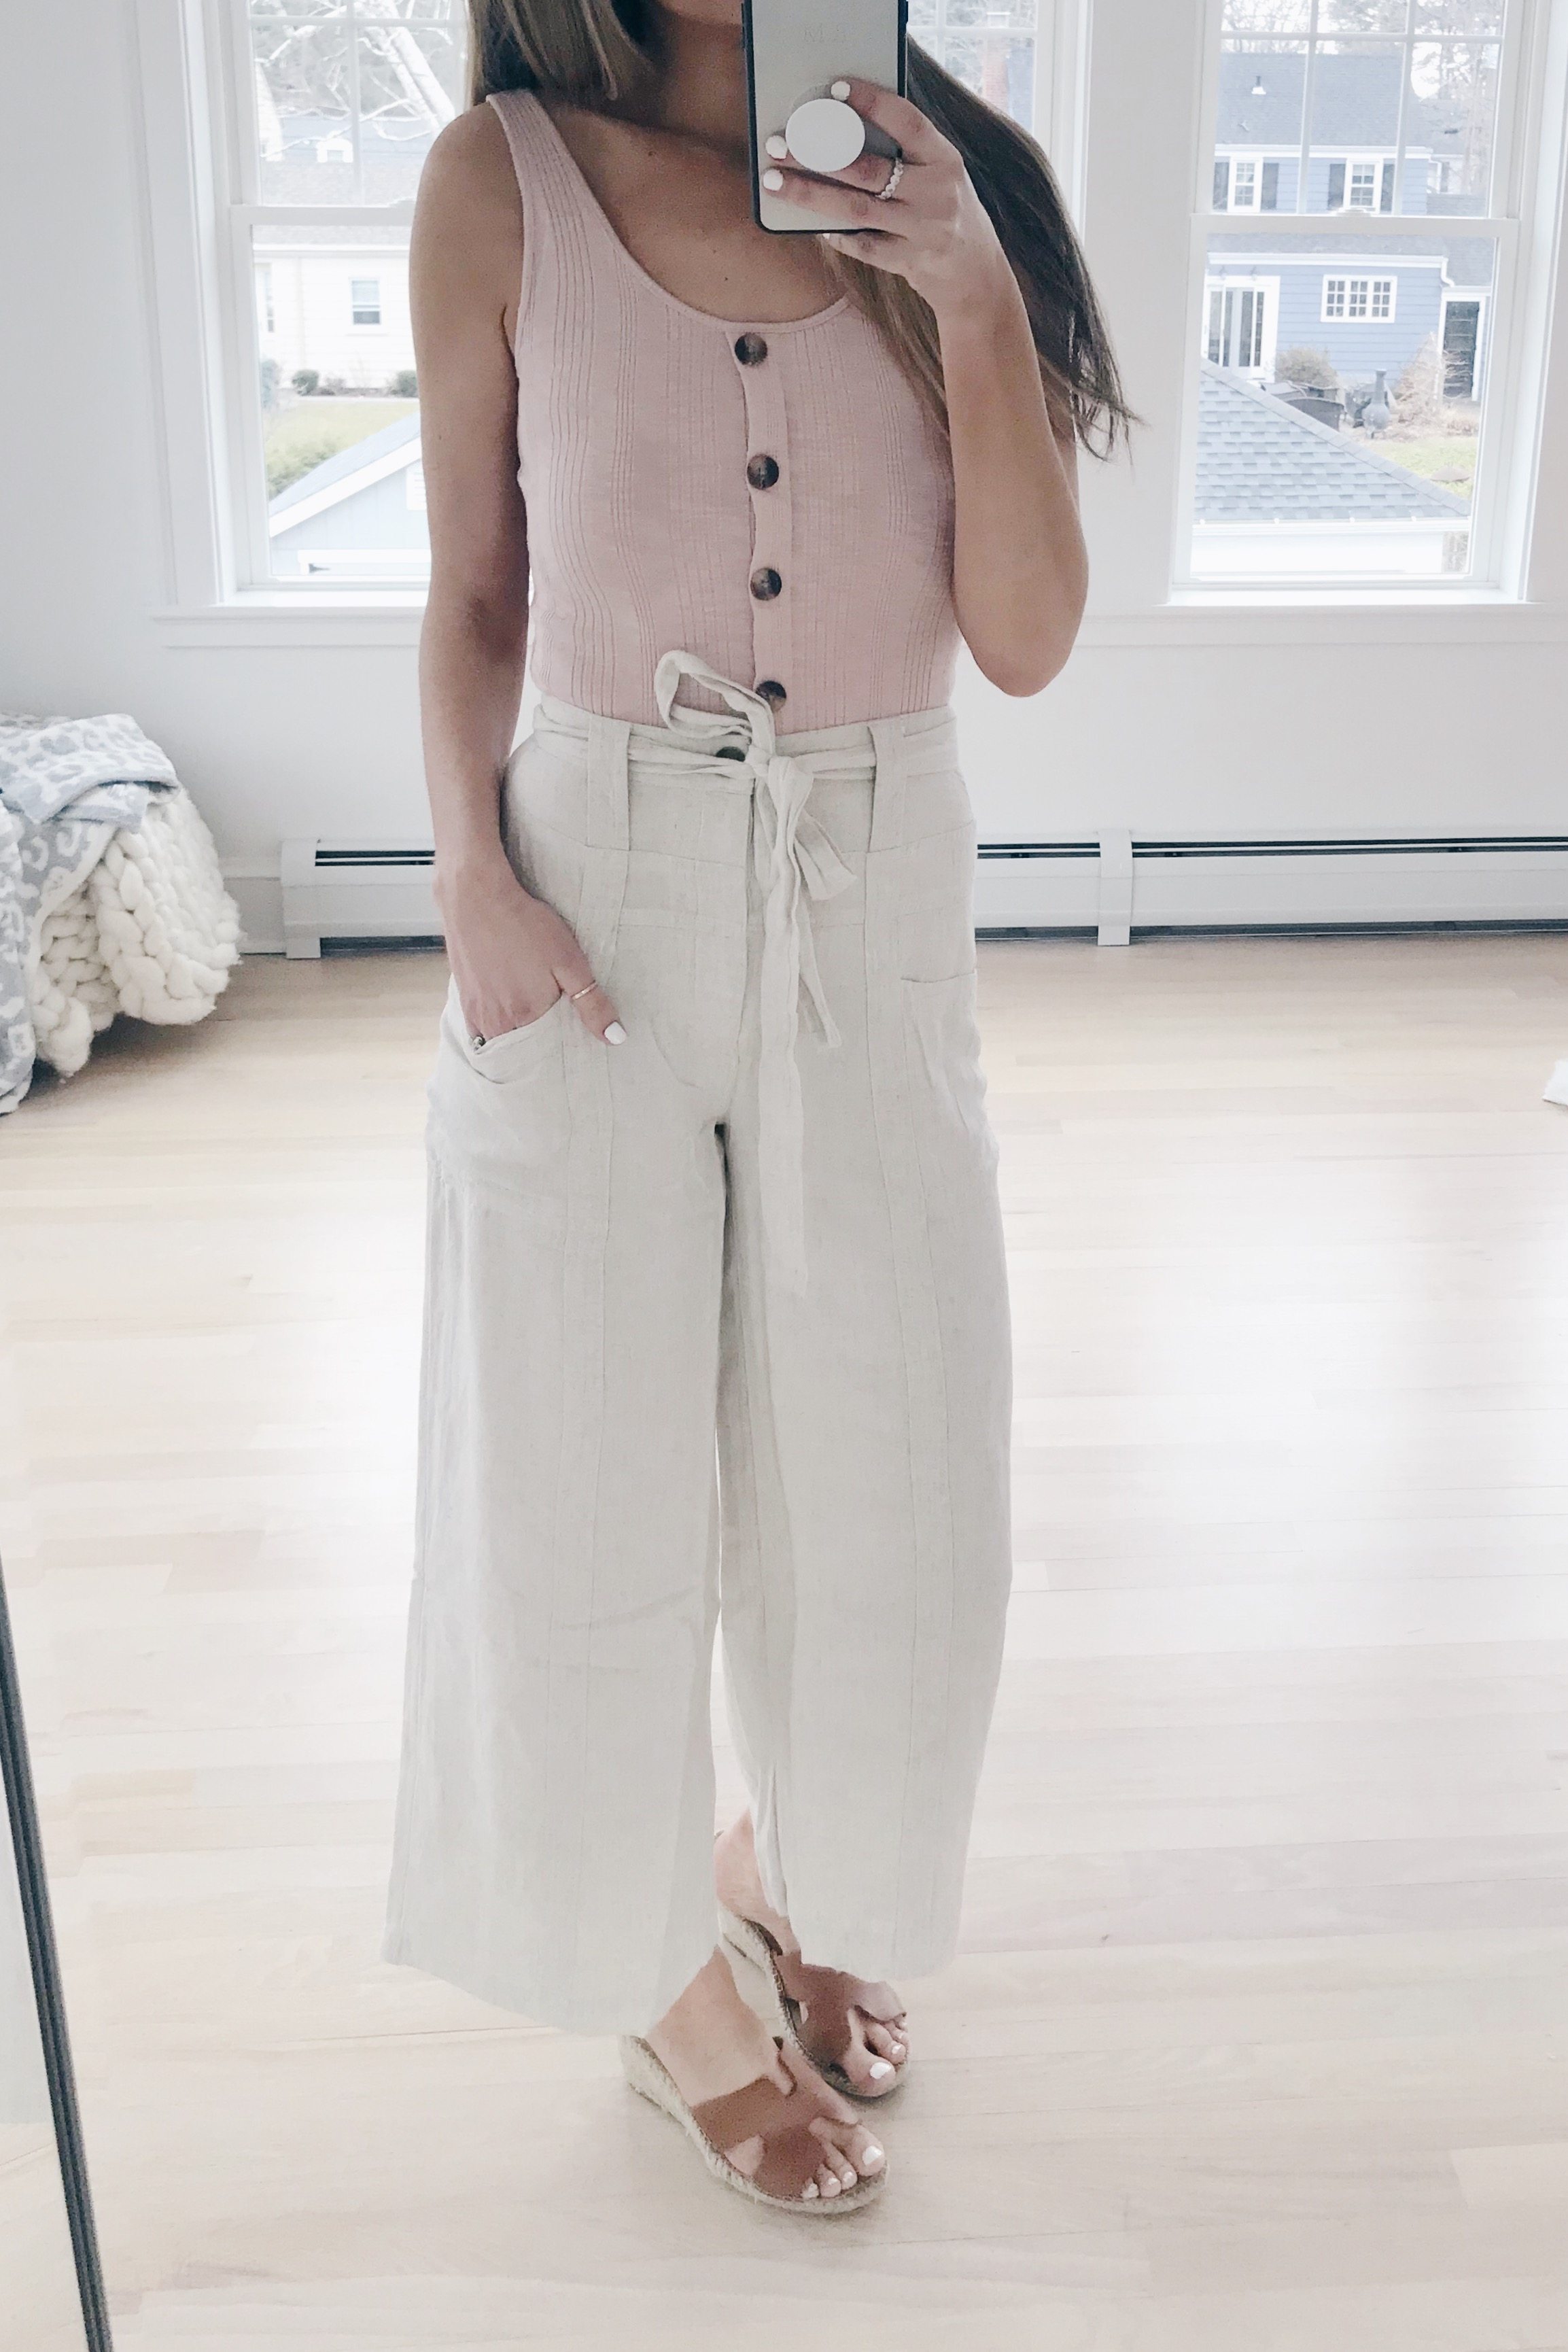 American Eagle Spring Try On - Wide Leg Tie front pants